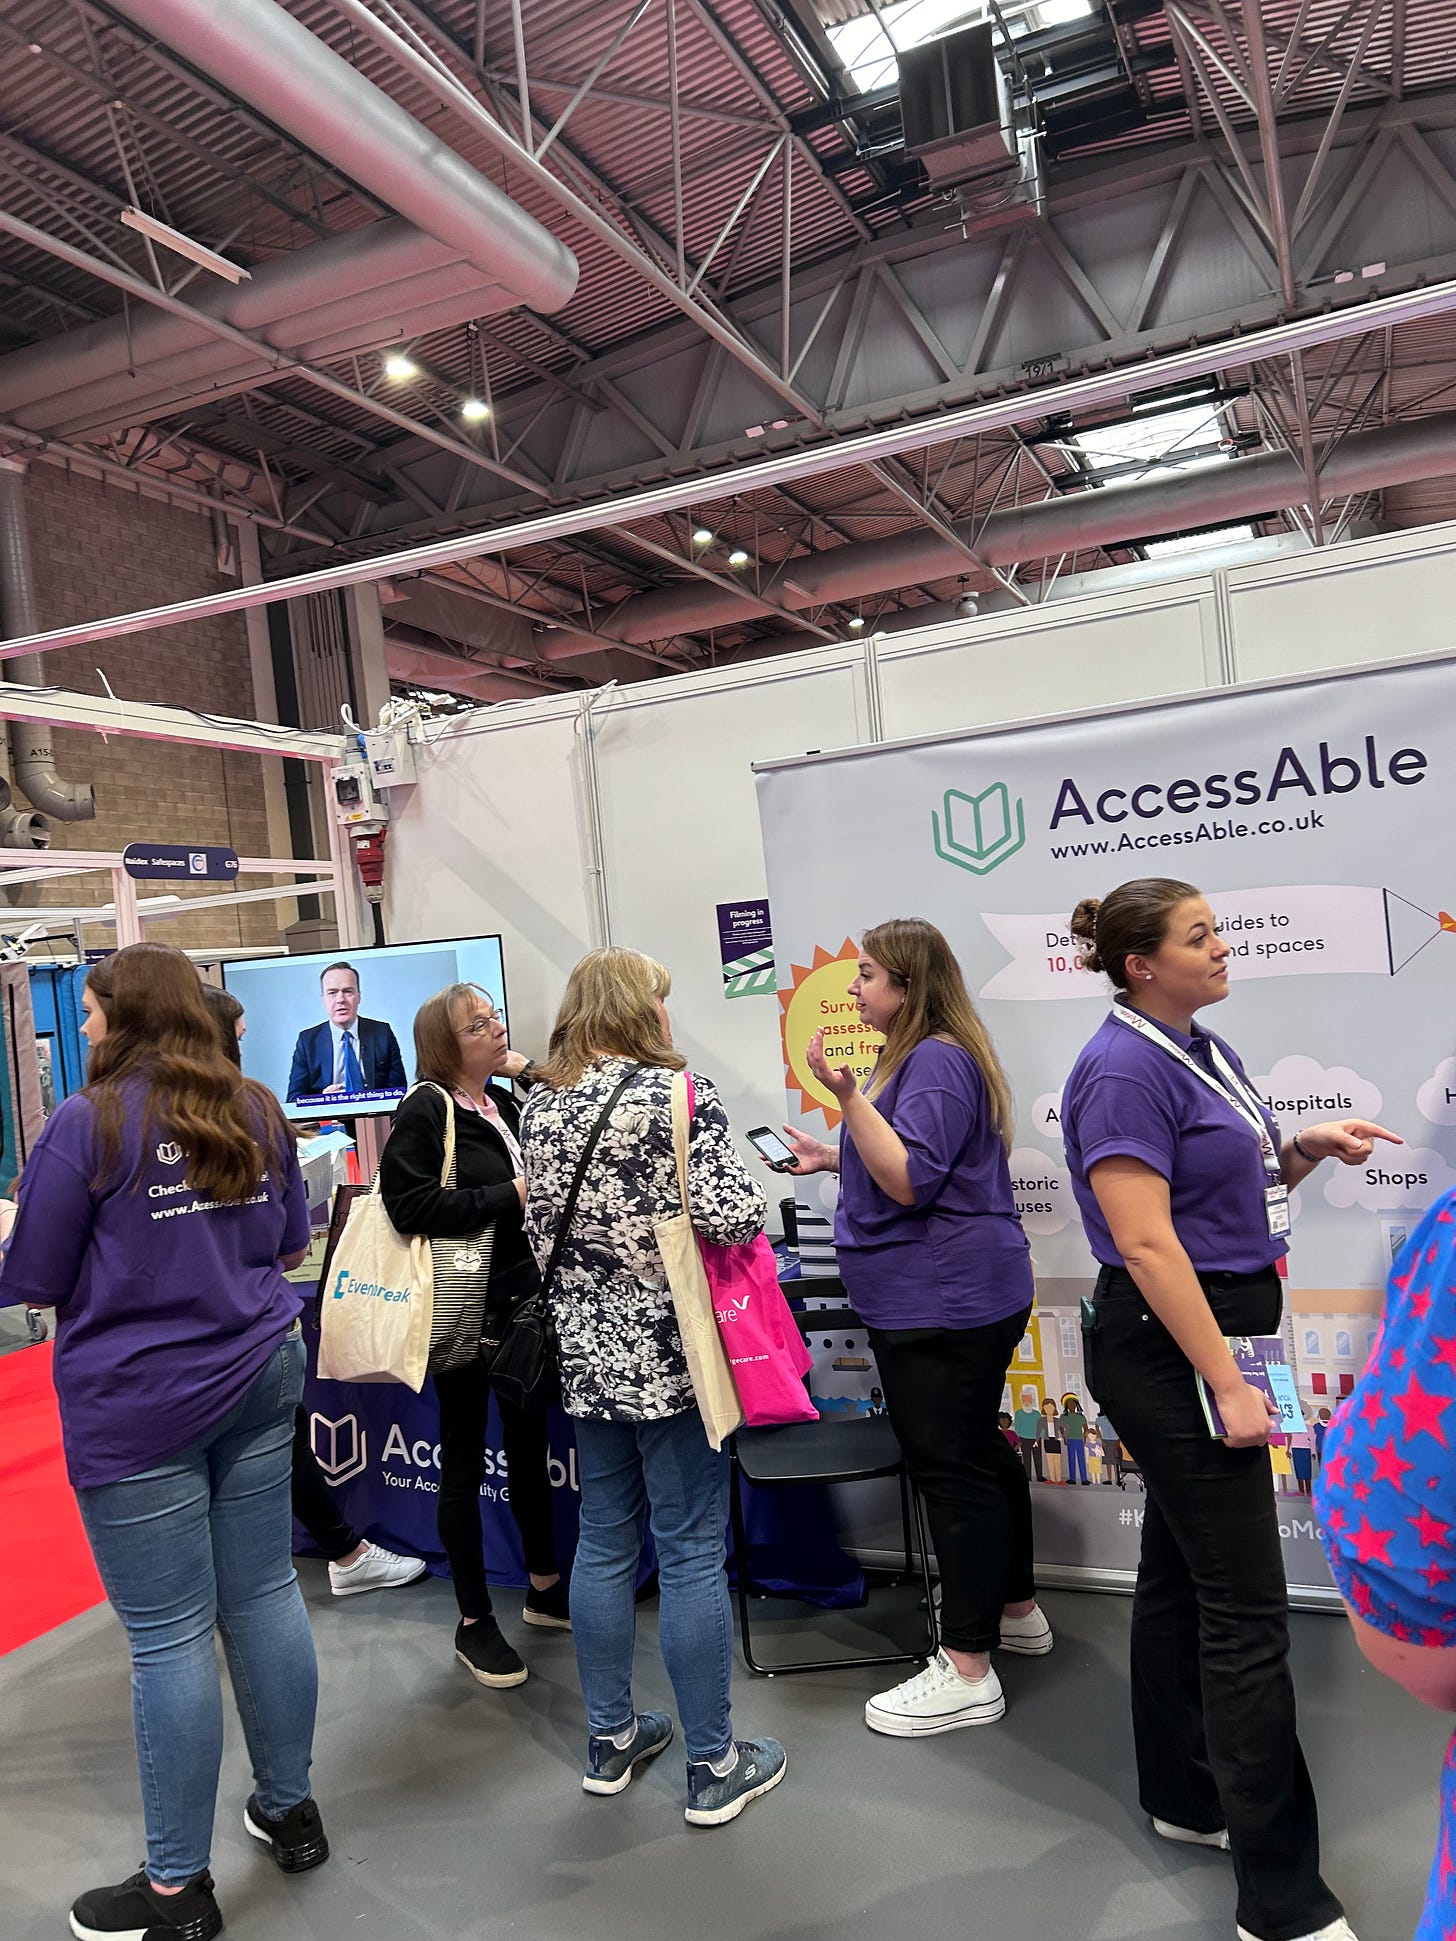 A shot of the busy AccessAble stand 